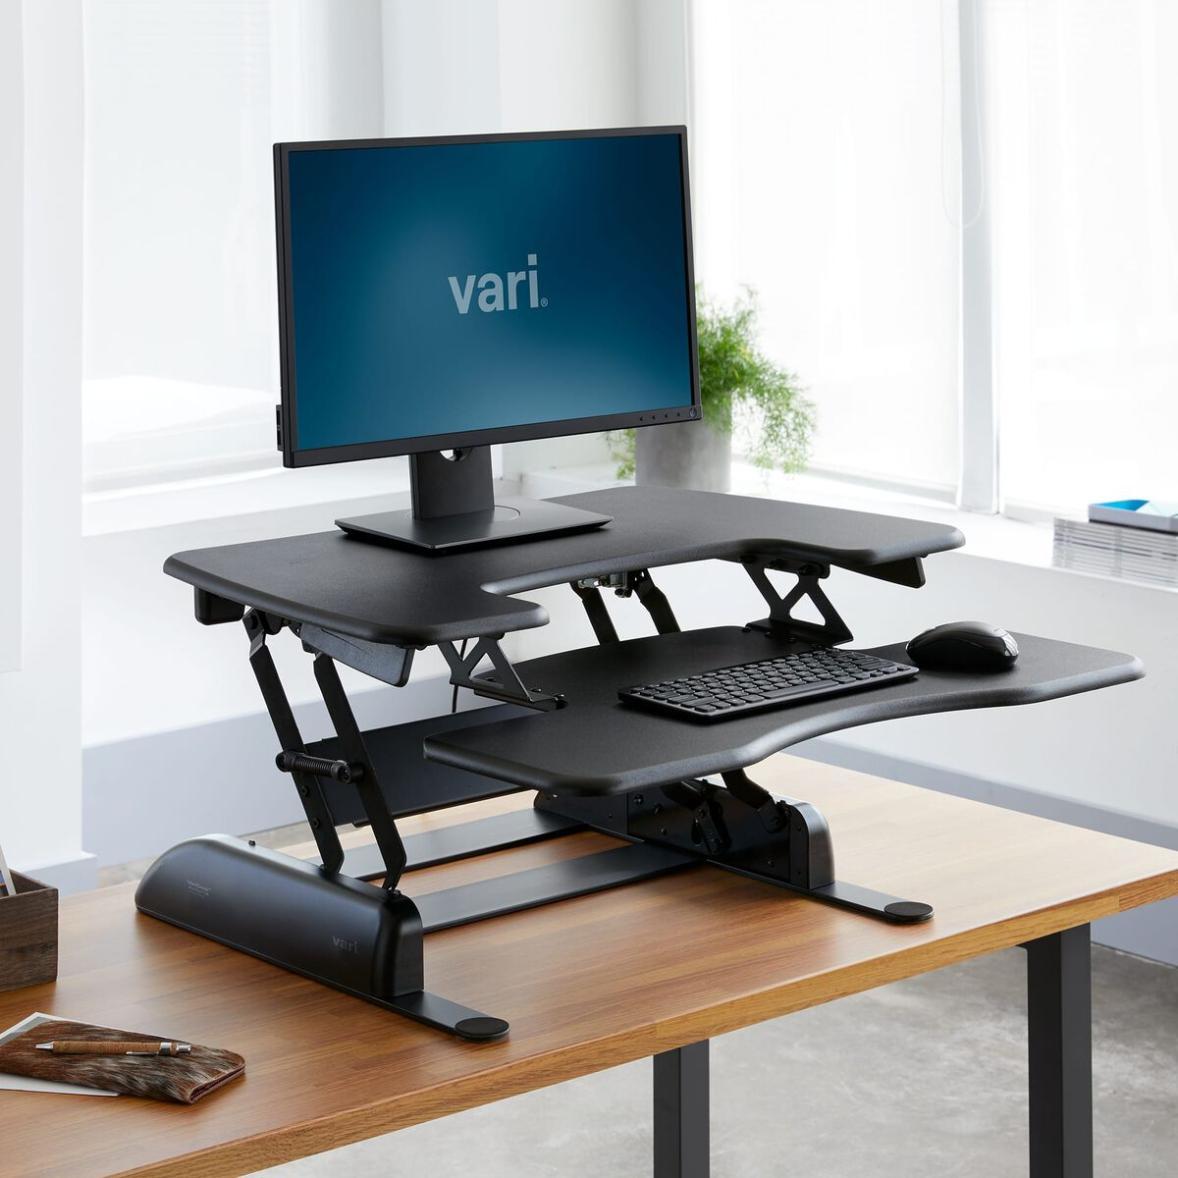 How to Choose the Right Standing Desk for Your Home Office